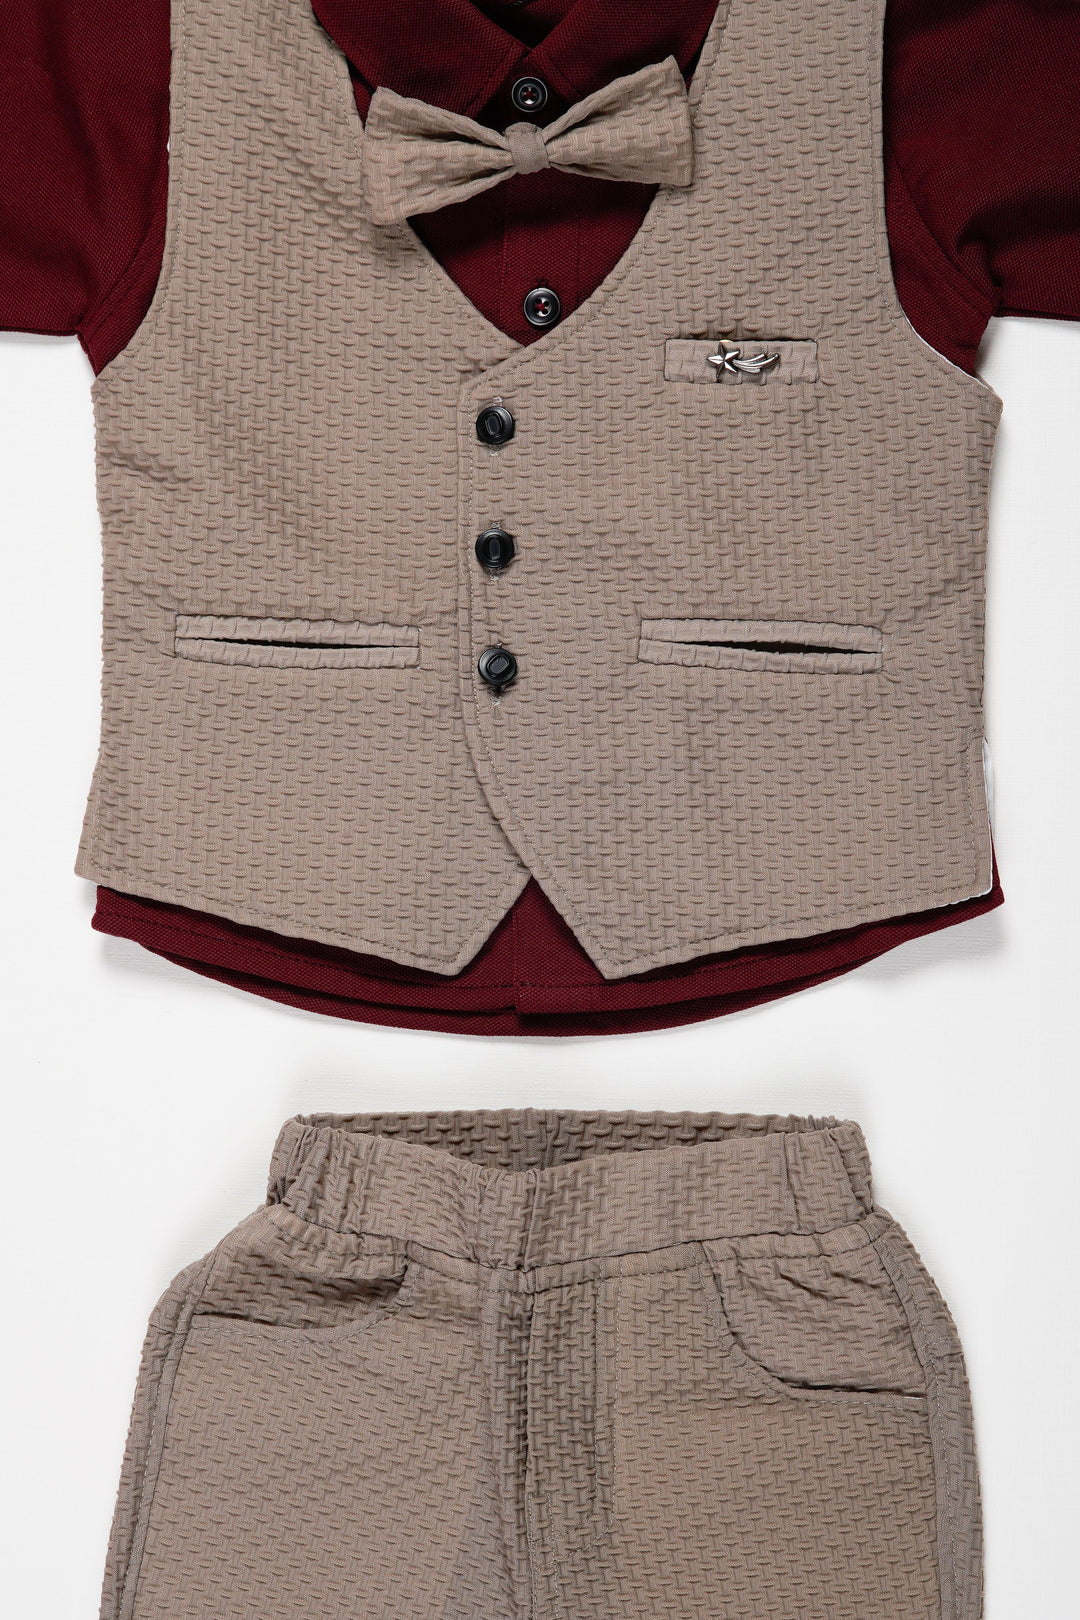 The Nesavu Boys Casual Set Boys Tailored Vest Suit Set with Contrast Trousers and Bow Tie Nesavu Boys Olive and Maroon Formal Suit Set | Stylish Vest and Trousers | The Nesavu